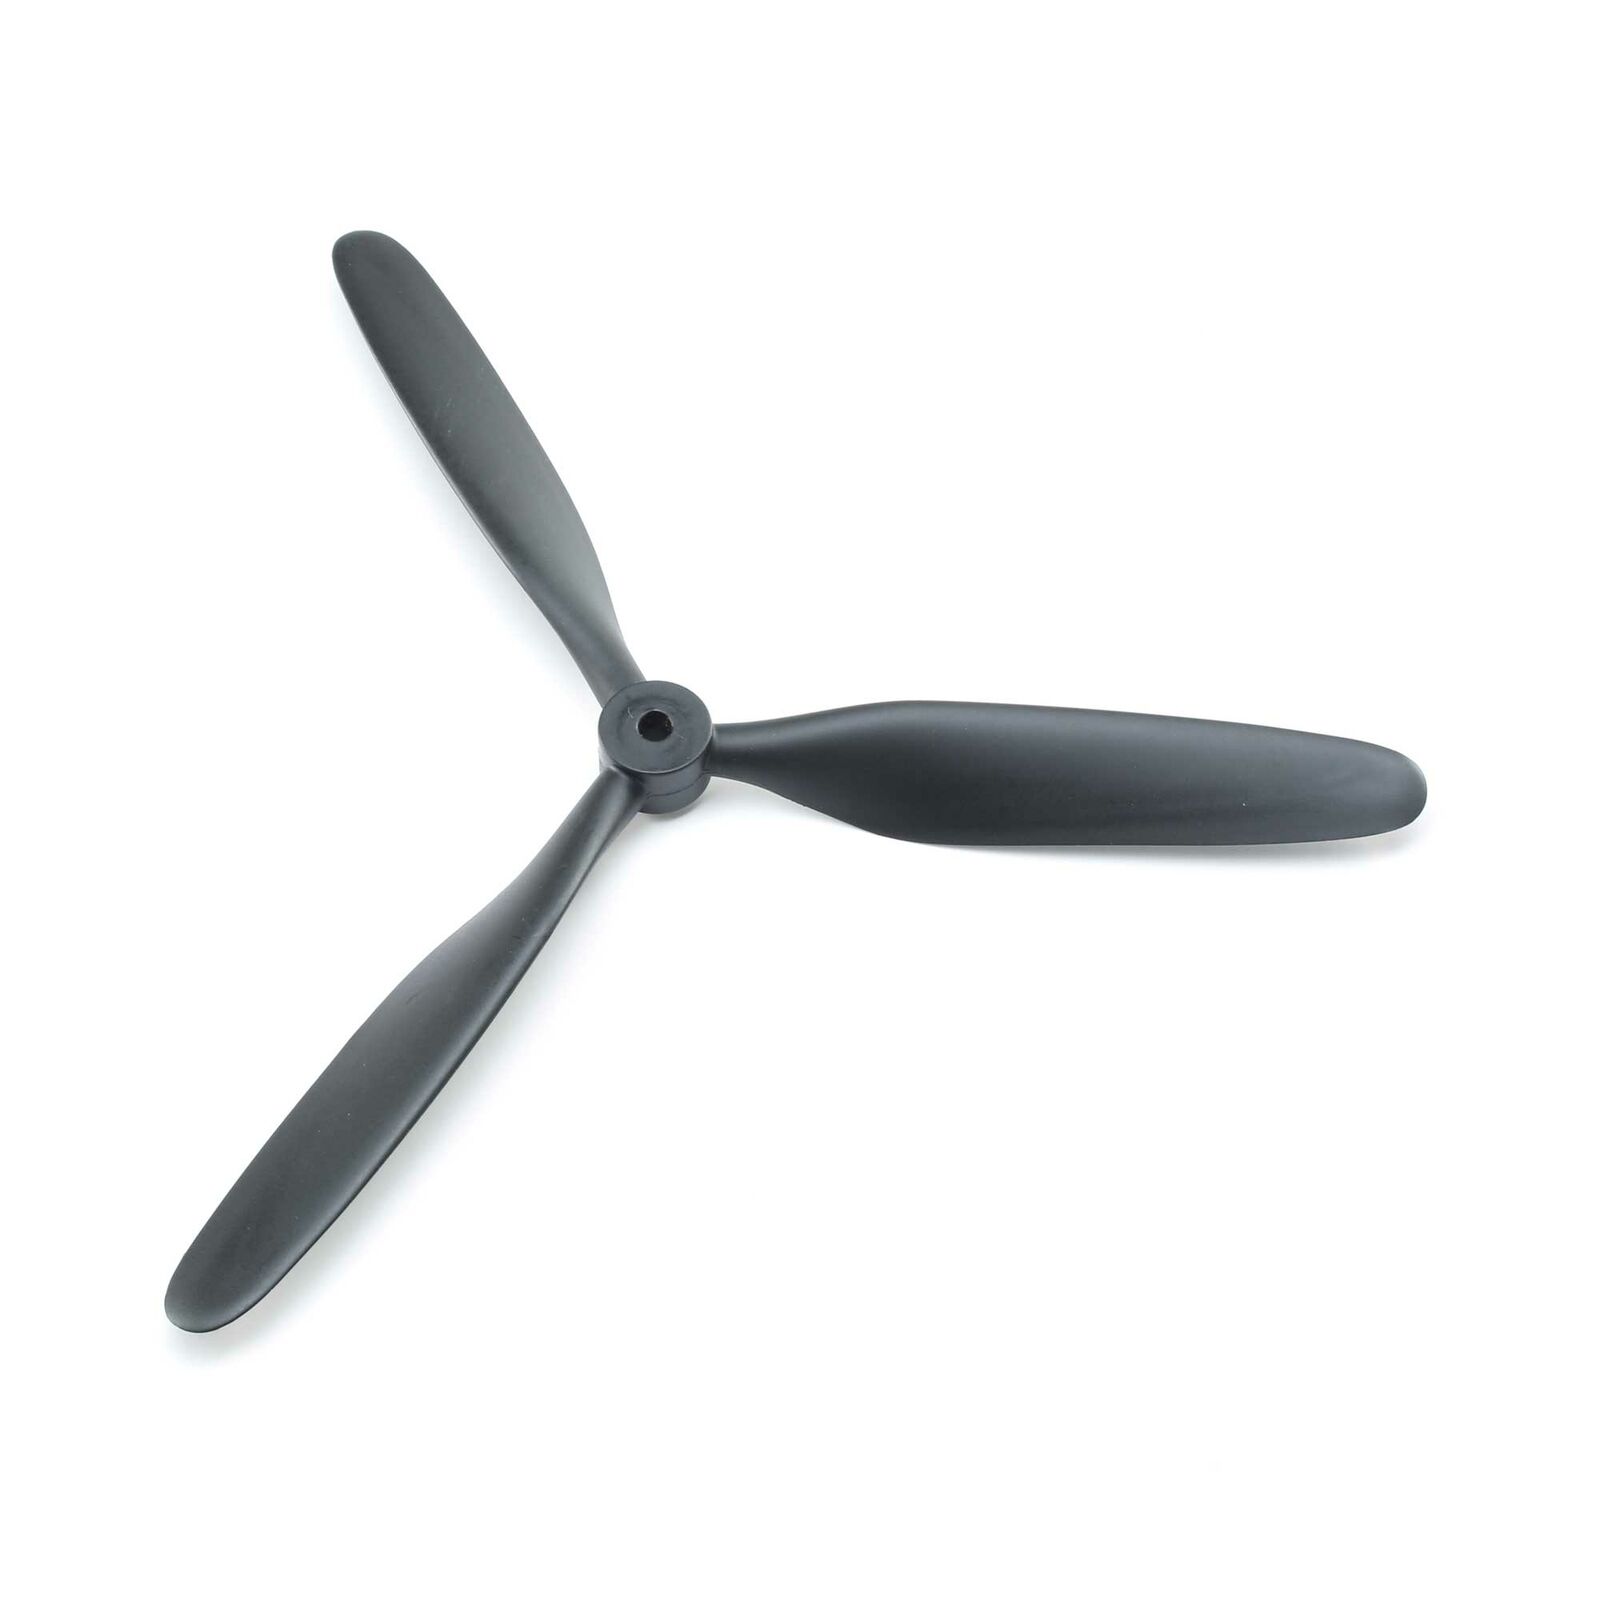 E-flite Propeller 3-Blade P-39 Airacobra 1.2m EFL9108 Replacement Airplane Parts